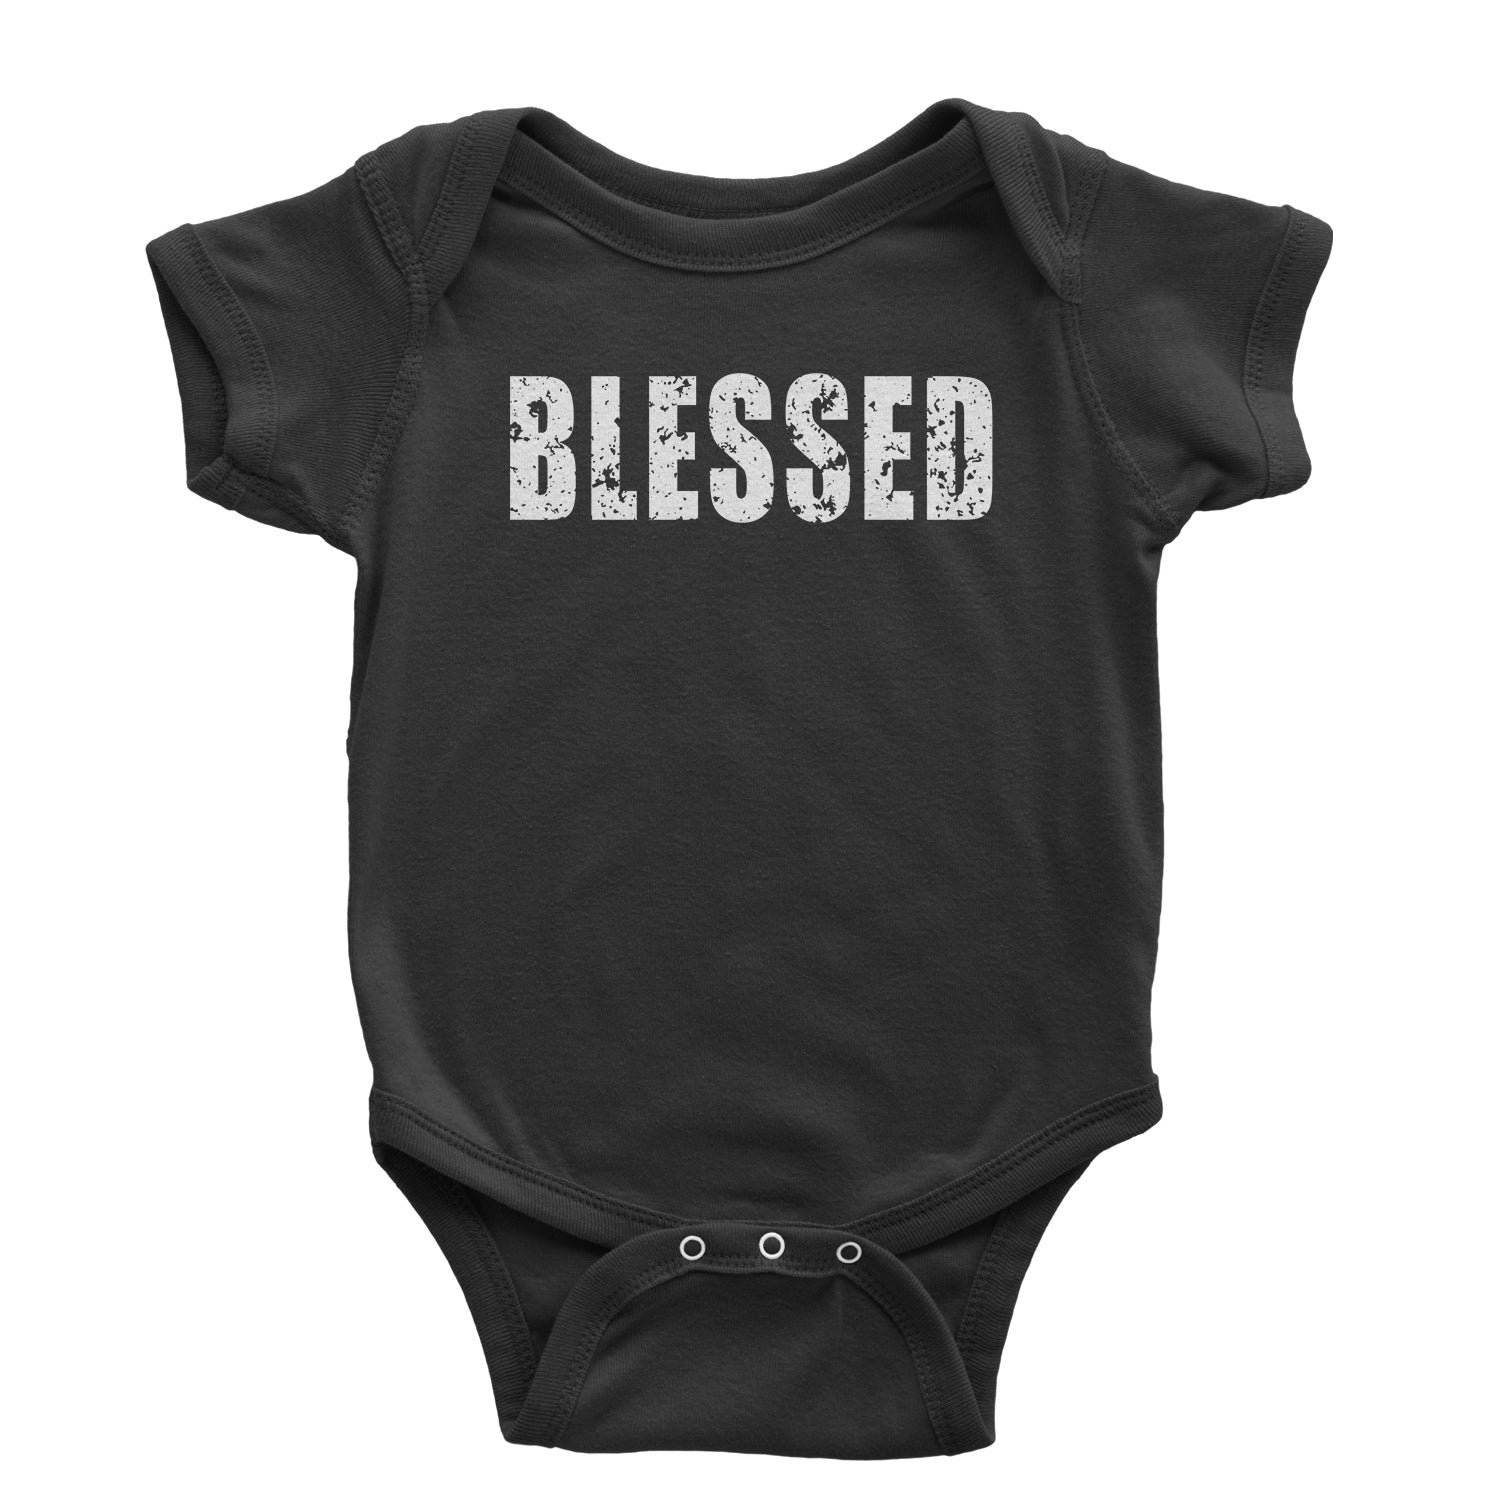 Blessed Religious Grateful Thankful Infant One-Piece Romper Bodysuit and Toddler T-shirt #expressiontees by Expression Tees